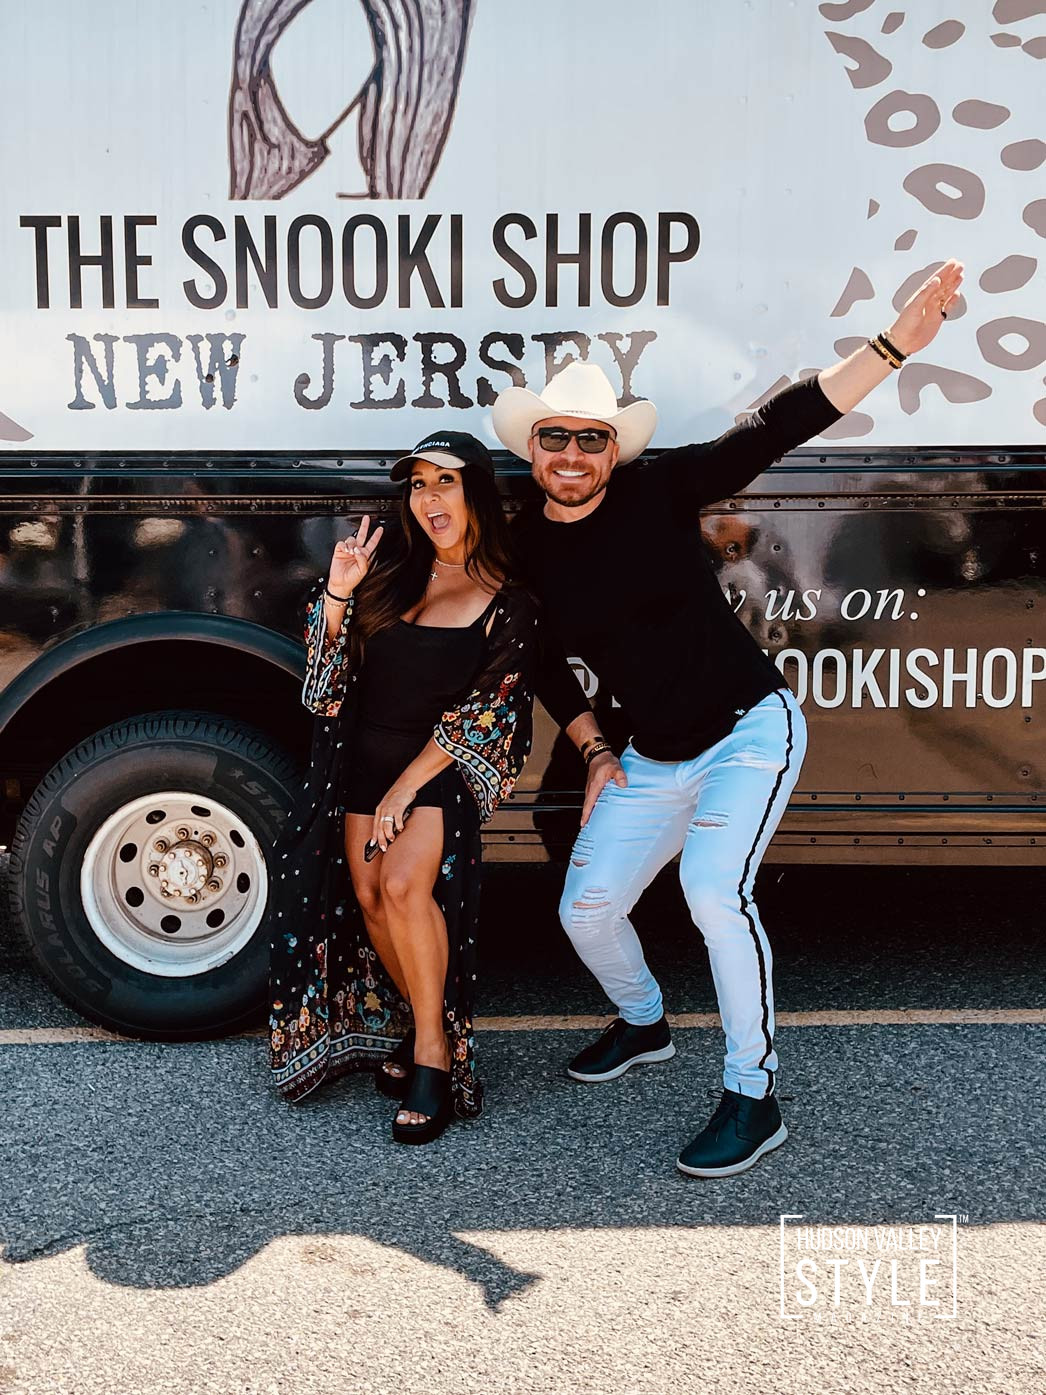 Snooki and the Snooki Shop at The Advanced Skin Med Spa Event in Fishkill, NY – Hudson Valley Style Magazine Photo Report by Maxwell Alexander